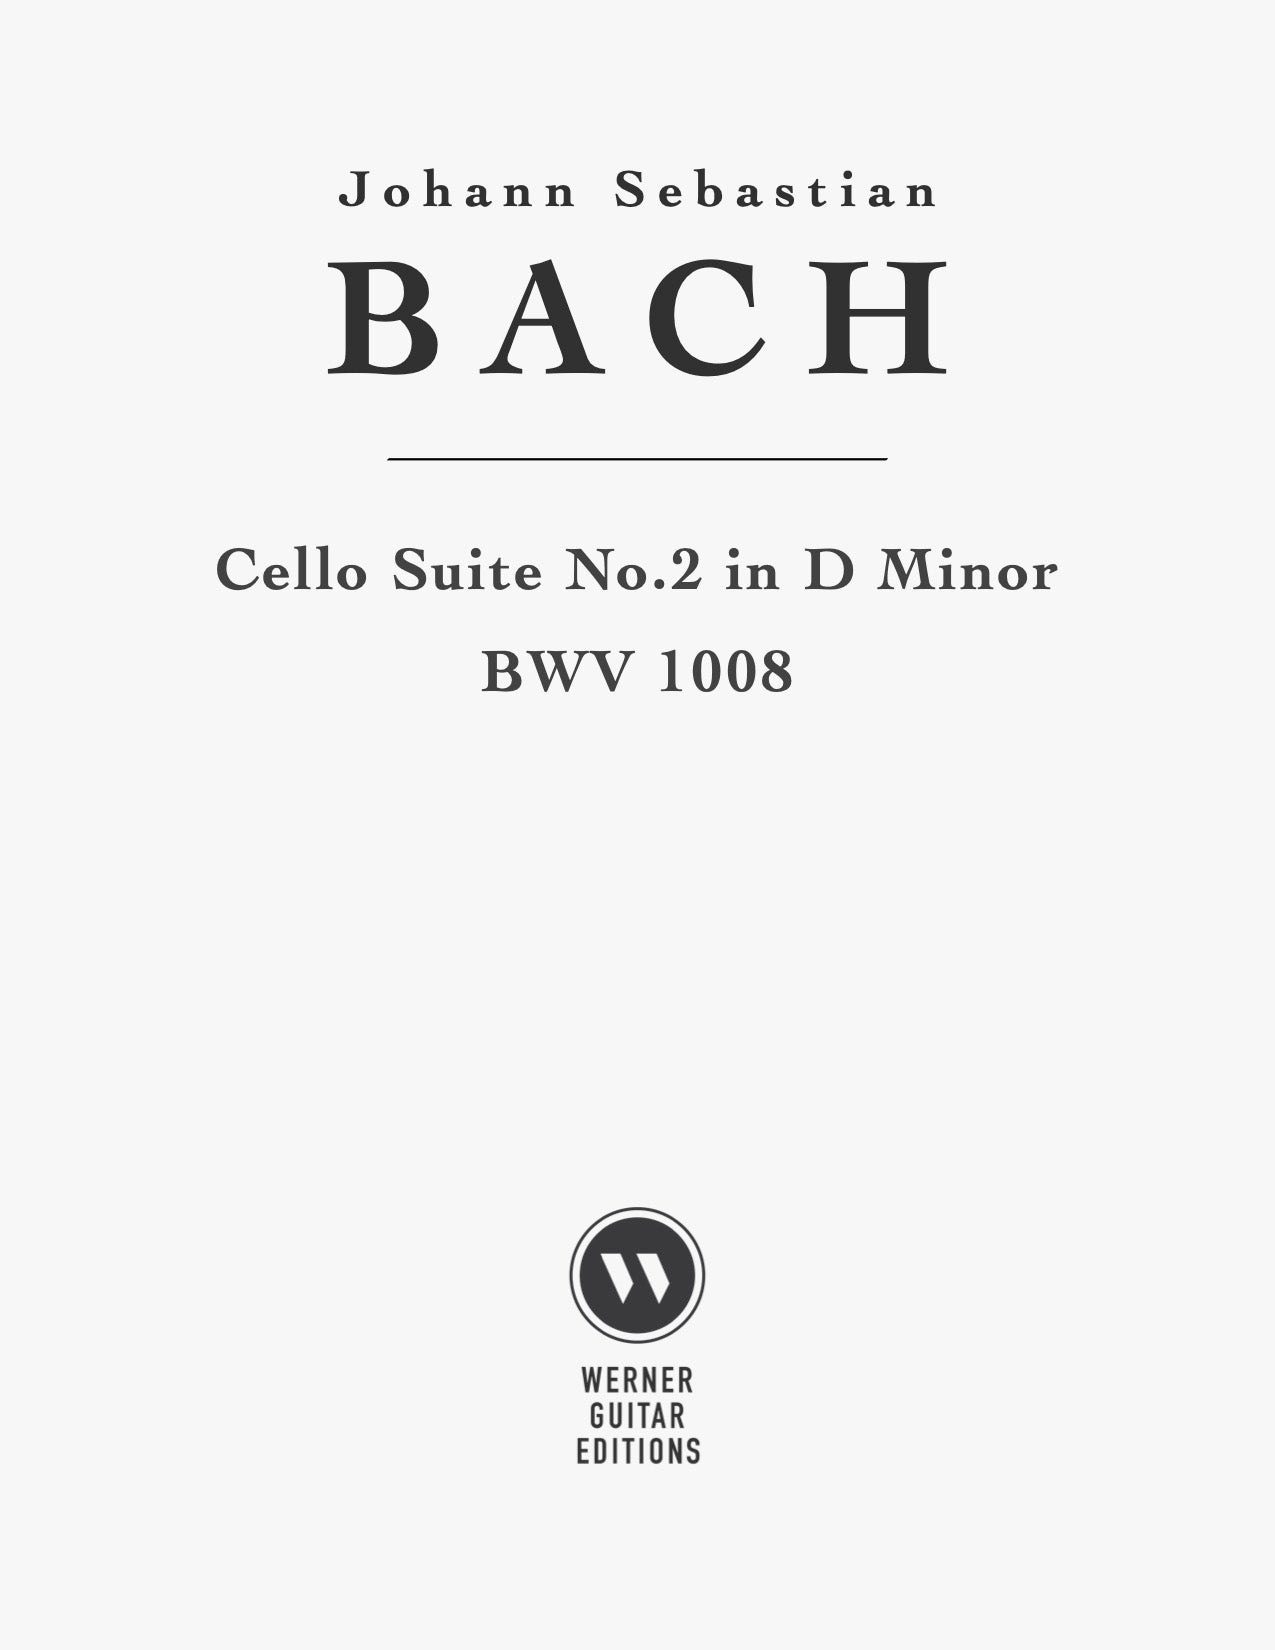 Cello Suite No.2, BWV 1008 by Bach for Guitar (PDF)